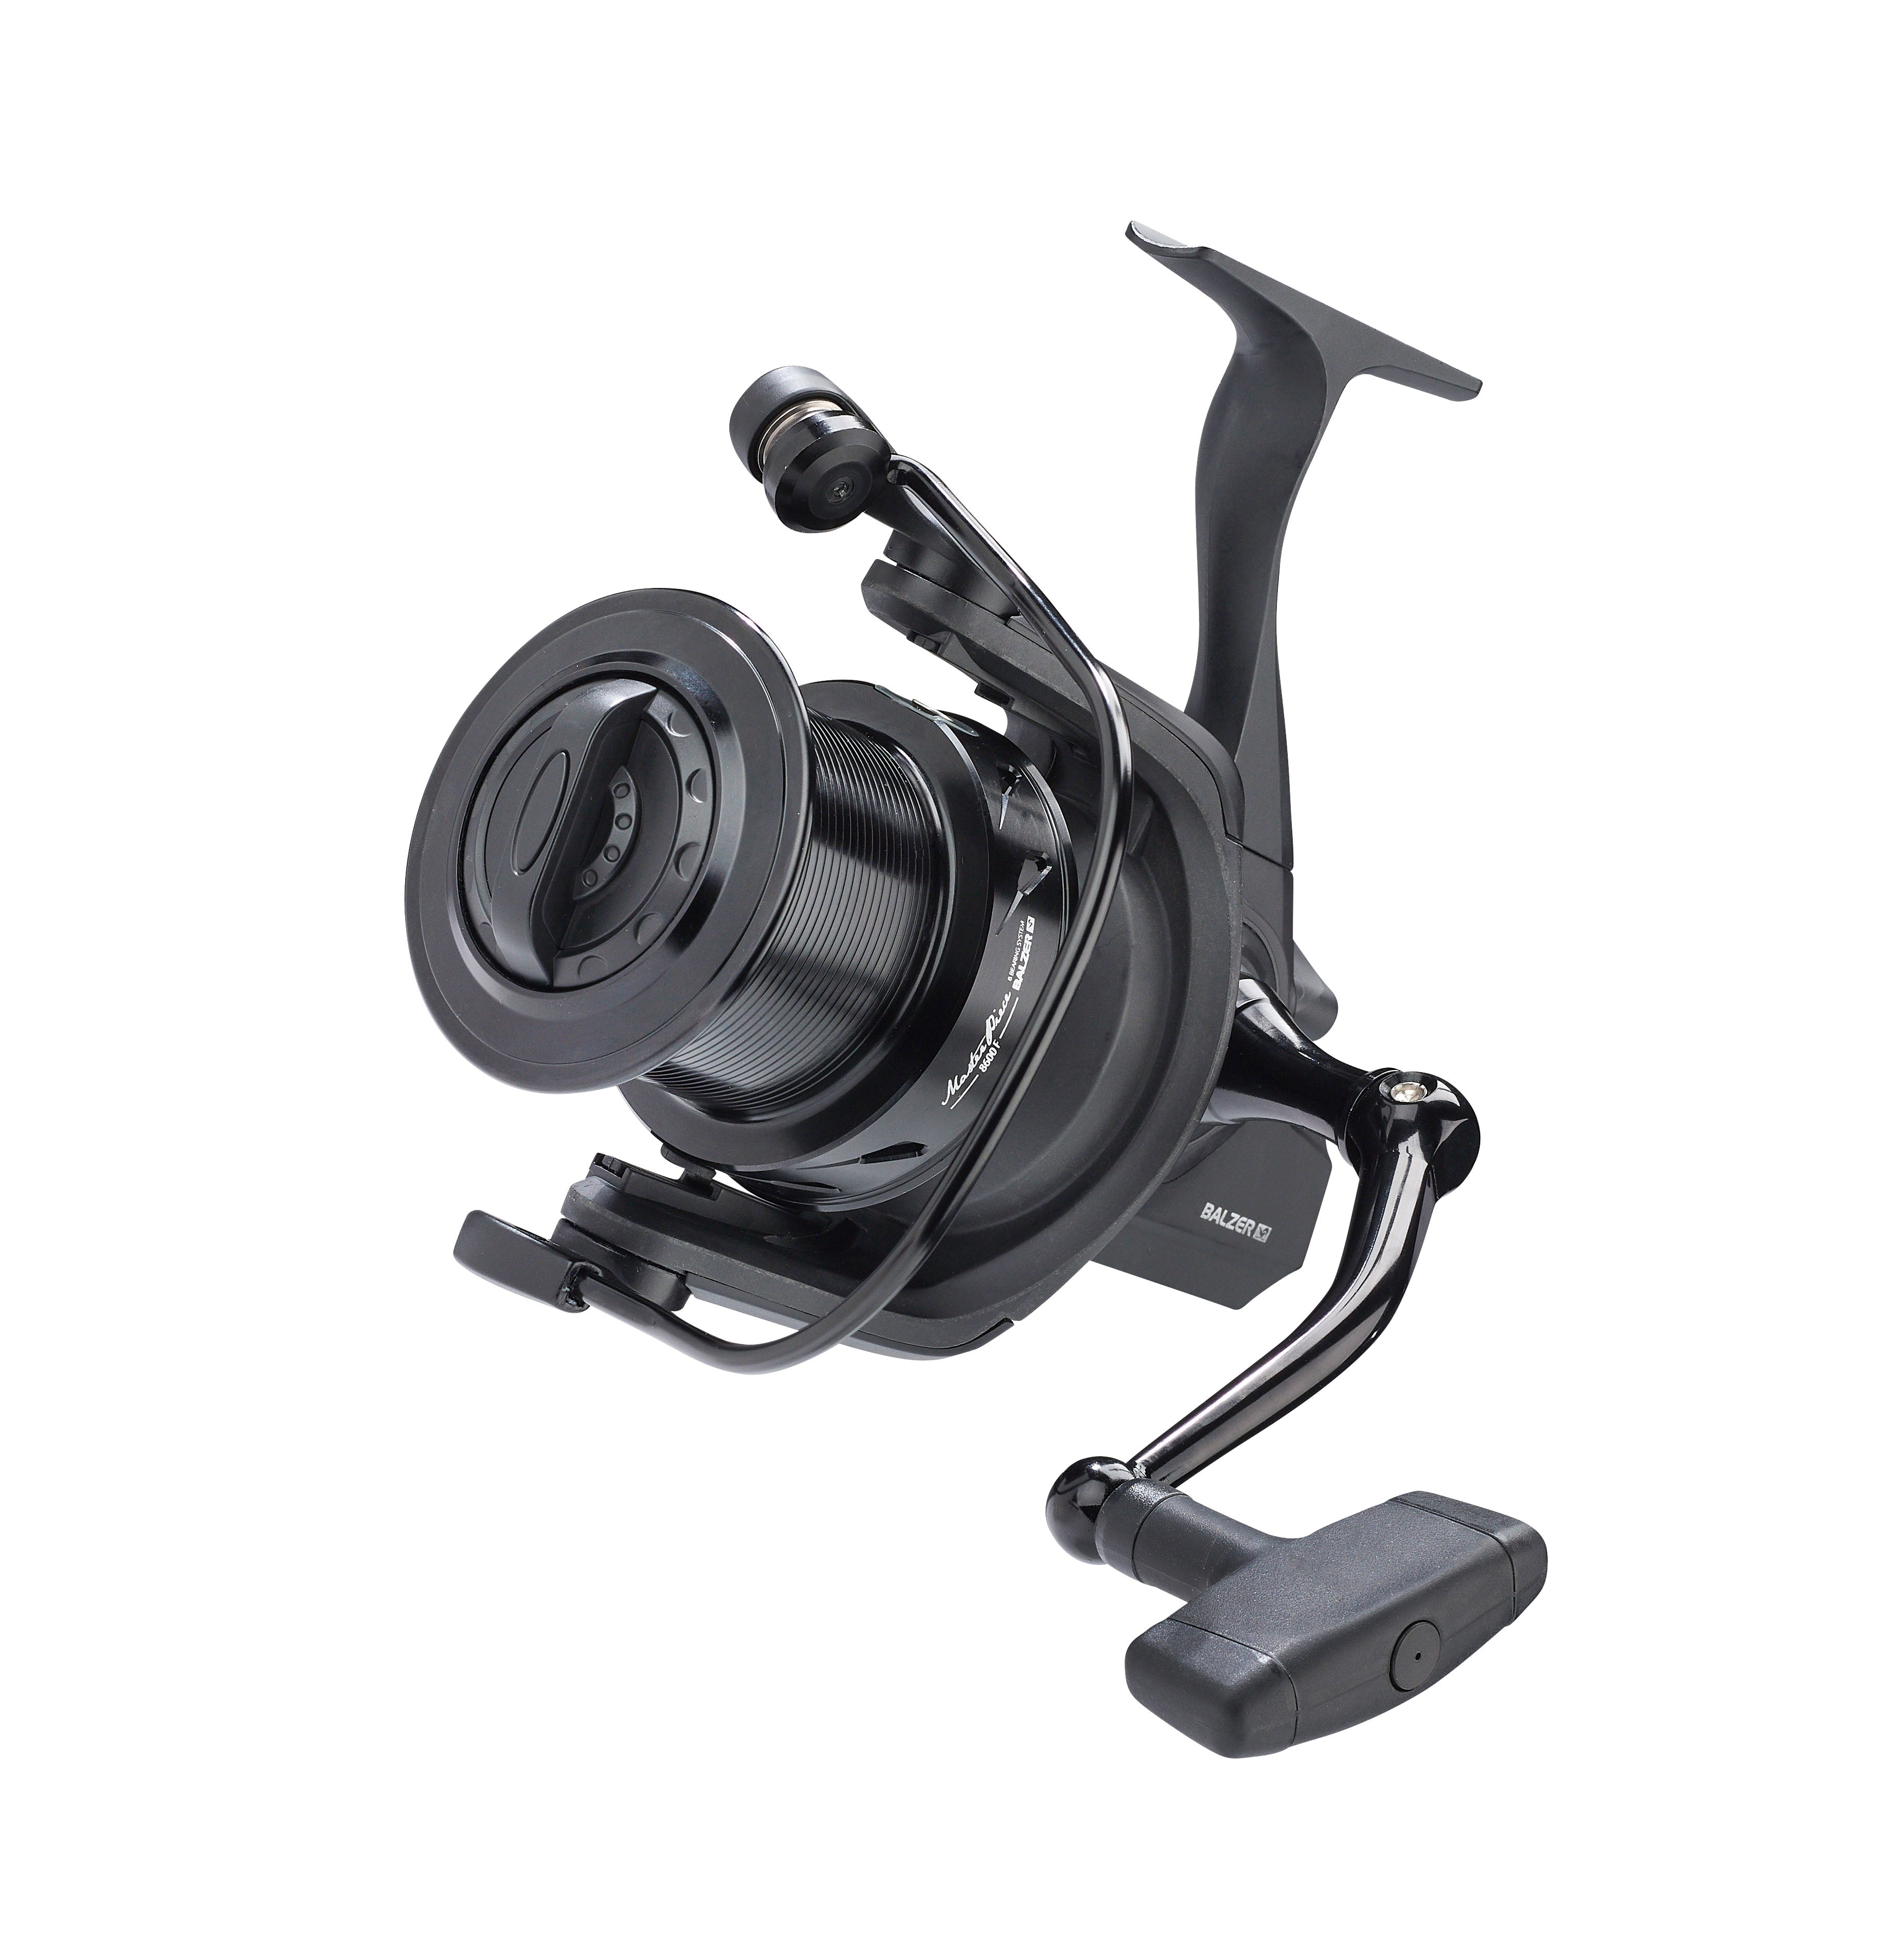 Our Best Surf Casting Reel - MasterPiece 8600 F – Balzer Fishing